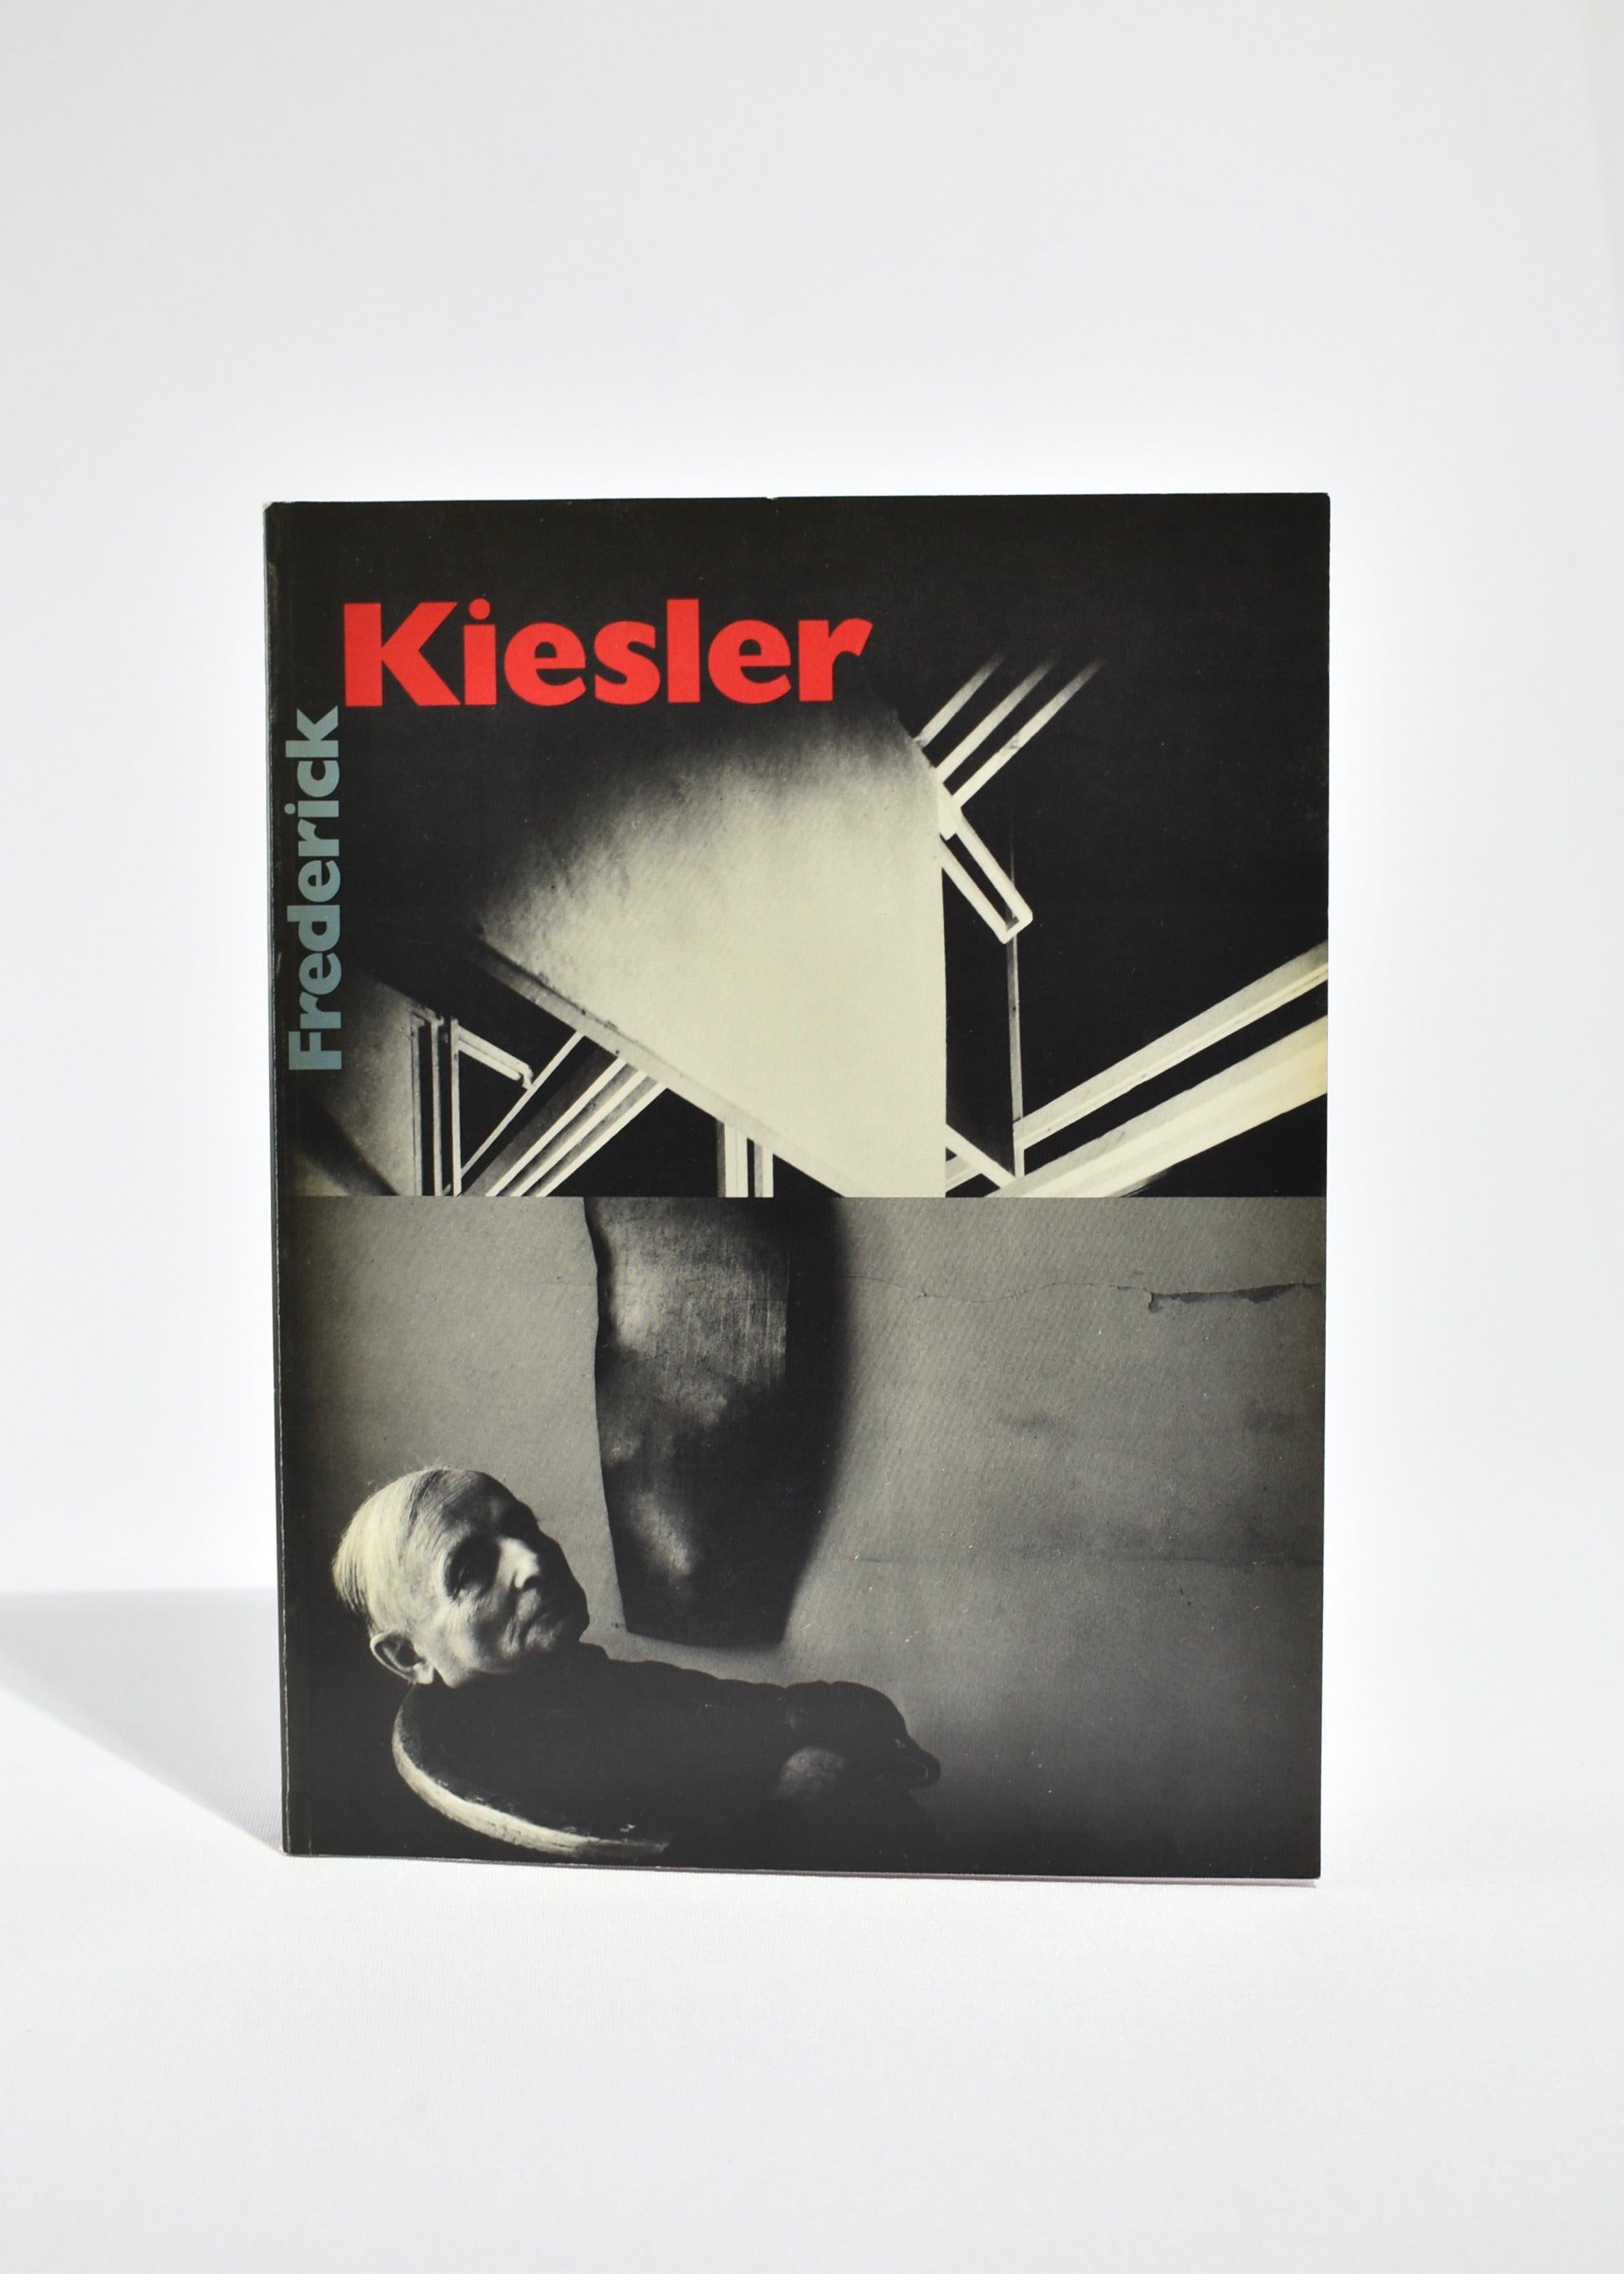 Vintage paperback coffee table book featuring a retrospective of the work of architect and stage designer, Frederick Kiesler. By Lisa Phillips, published in 1989. 1st edition, 170 pages.

